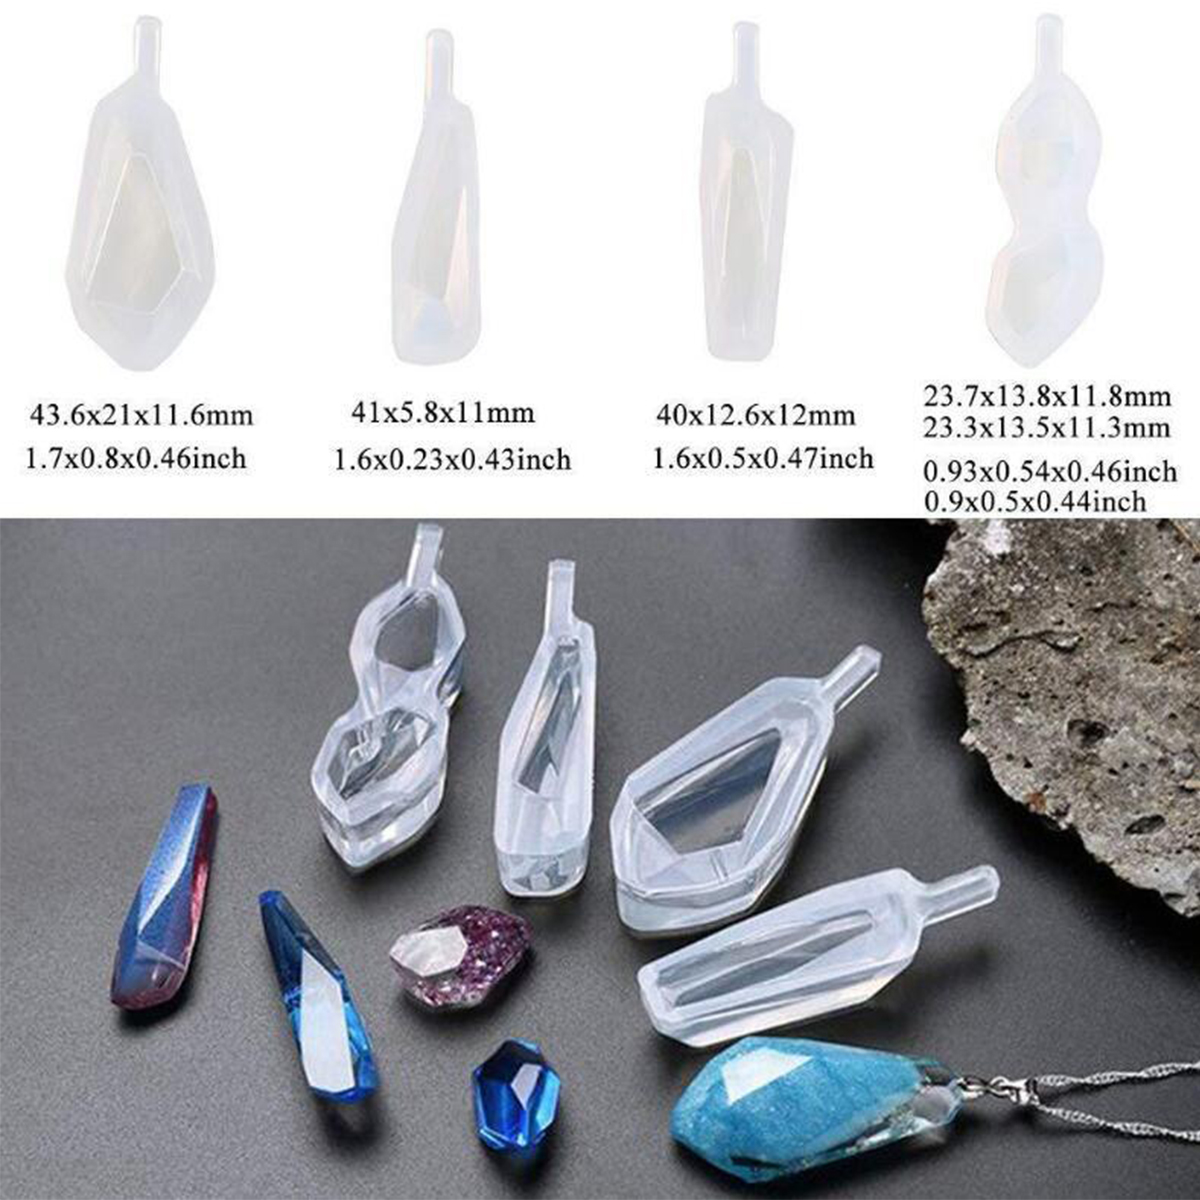 129PcsSet-Silicone-Casting-Molds-Tools-Jewelry-Pendant-Resin-Mould-DIY-1613609-3